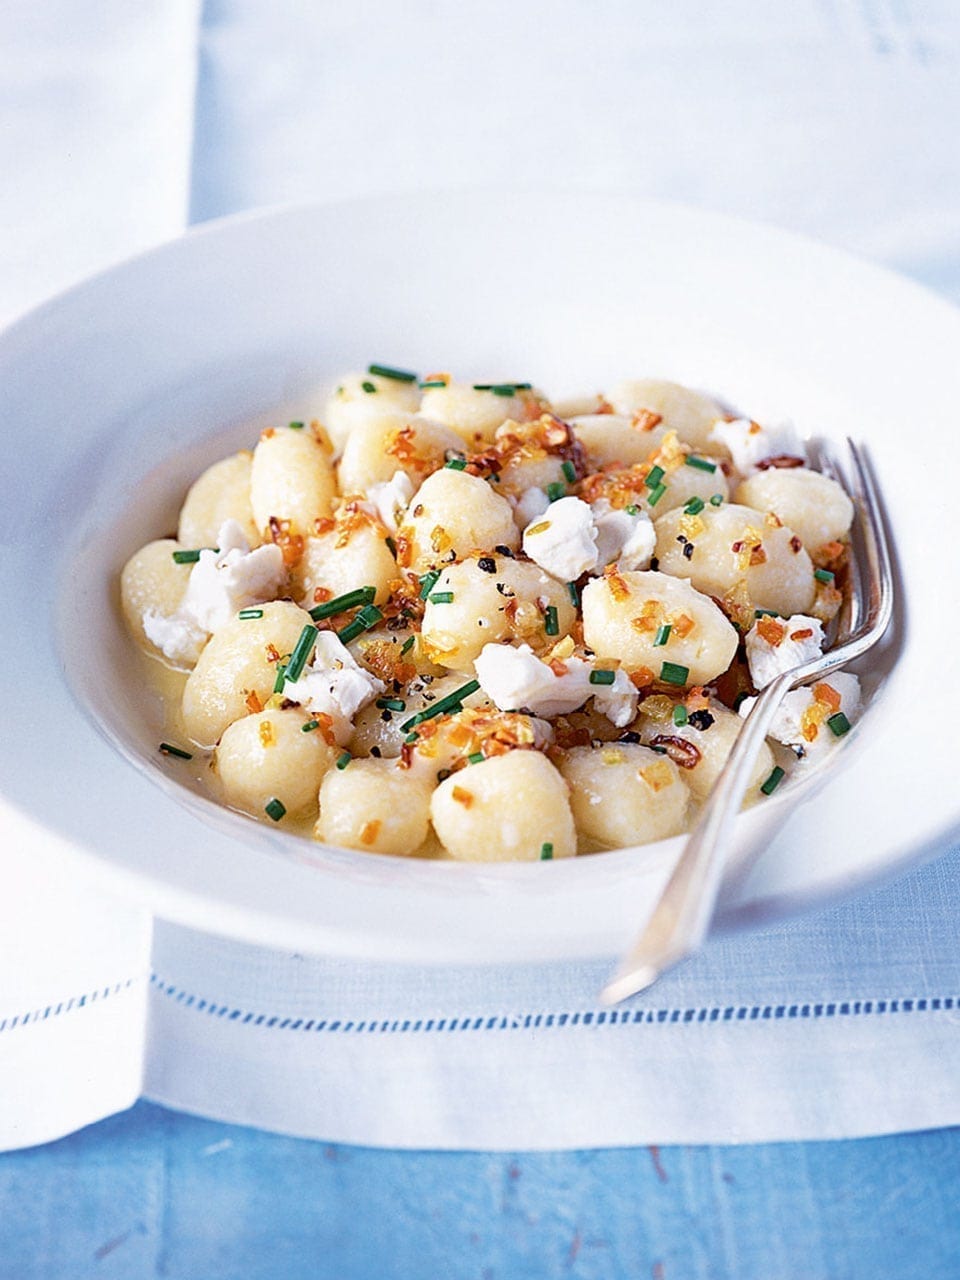 Gnocchi with goat's cheese and chives recipe | delicious. magazine